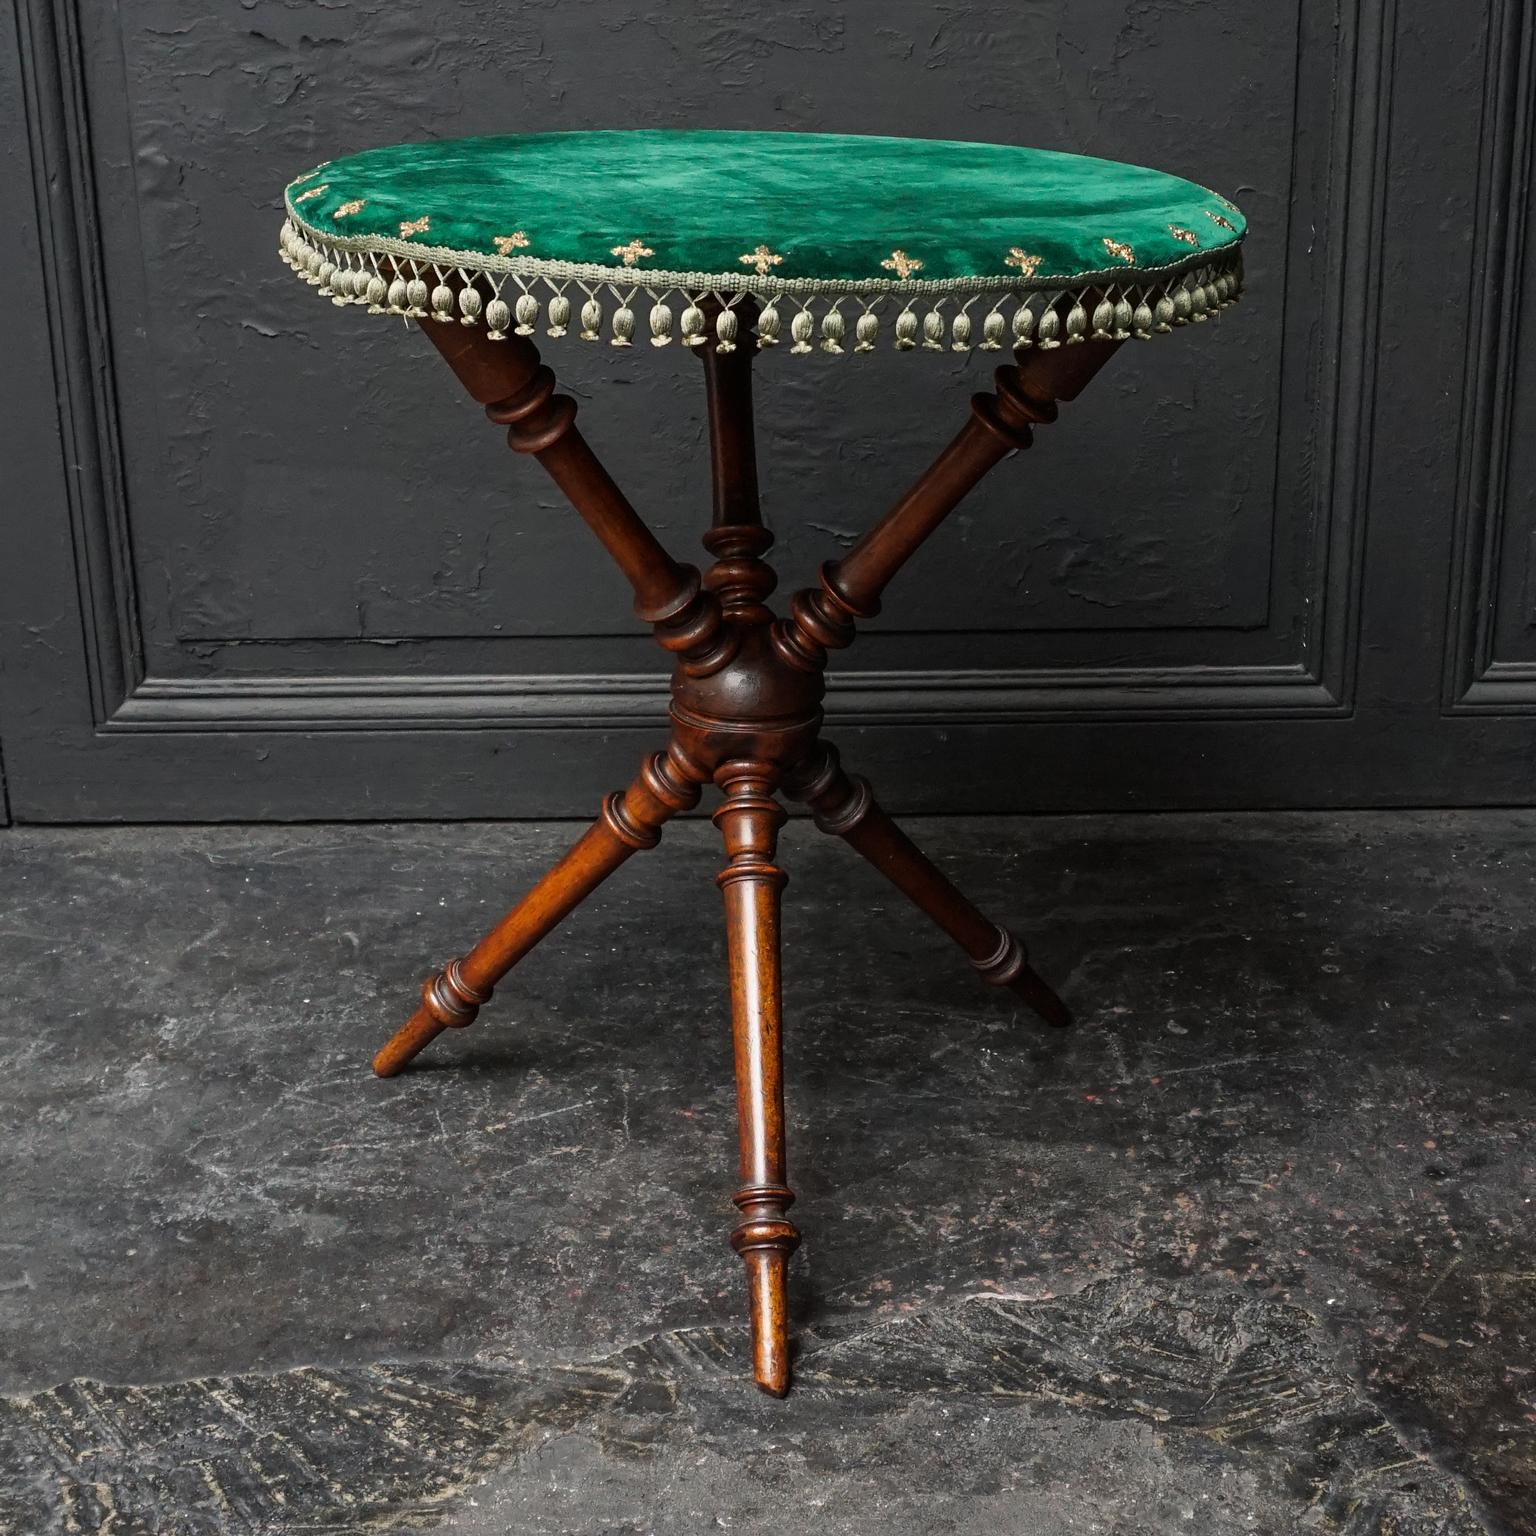 20th century occasional bobbin turned tripod mahogany table with green velvet top decorated with green tasseled band and gilt brass crosses.
The tripod legs are shaped in a Classic X-joint at the bottom. 

This little Gypsy Victorian-style table